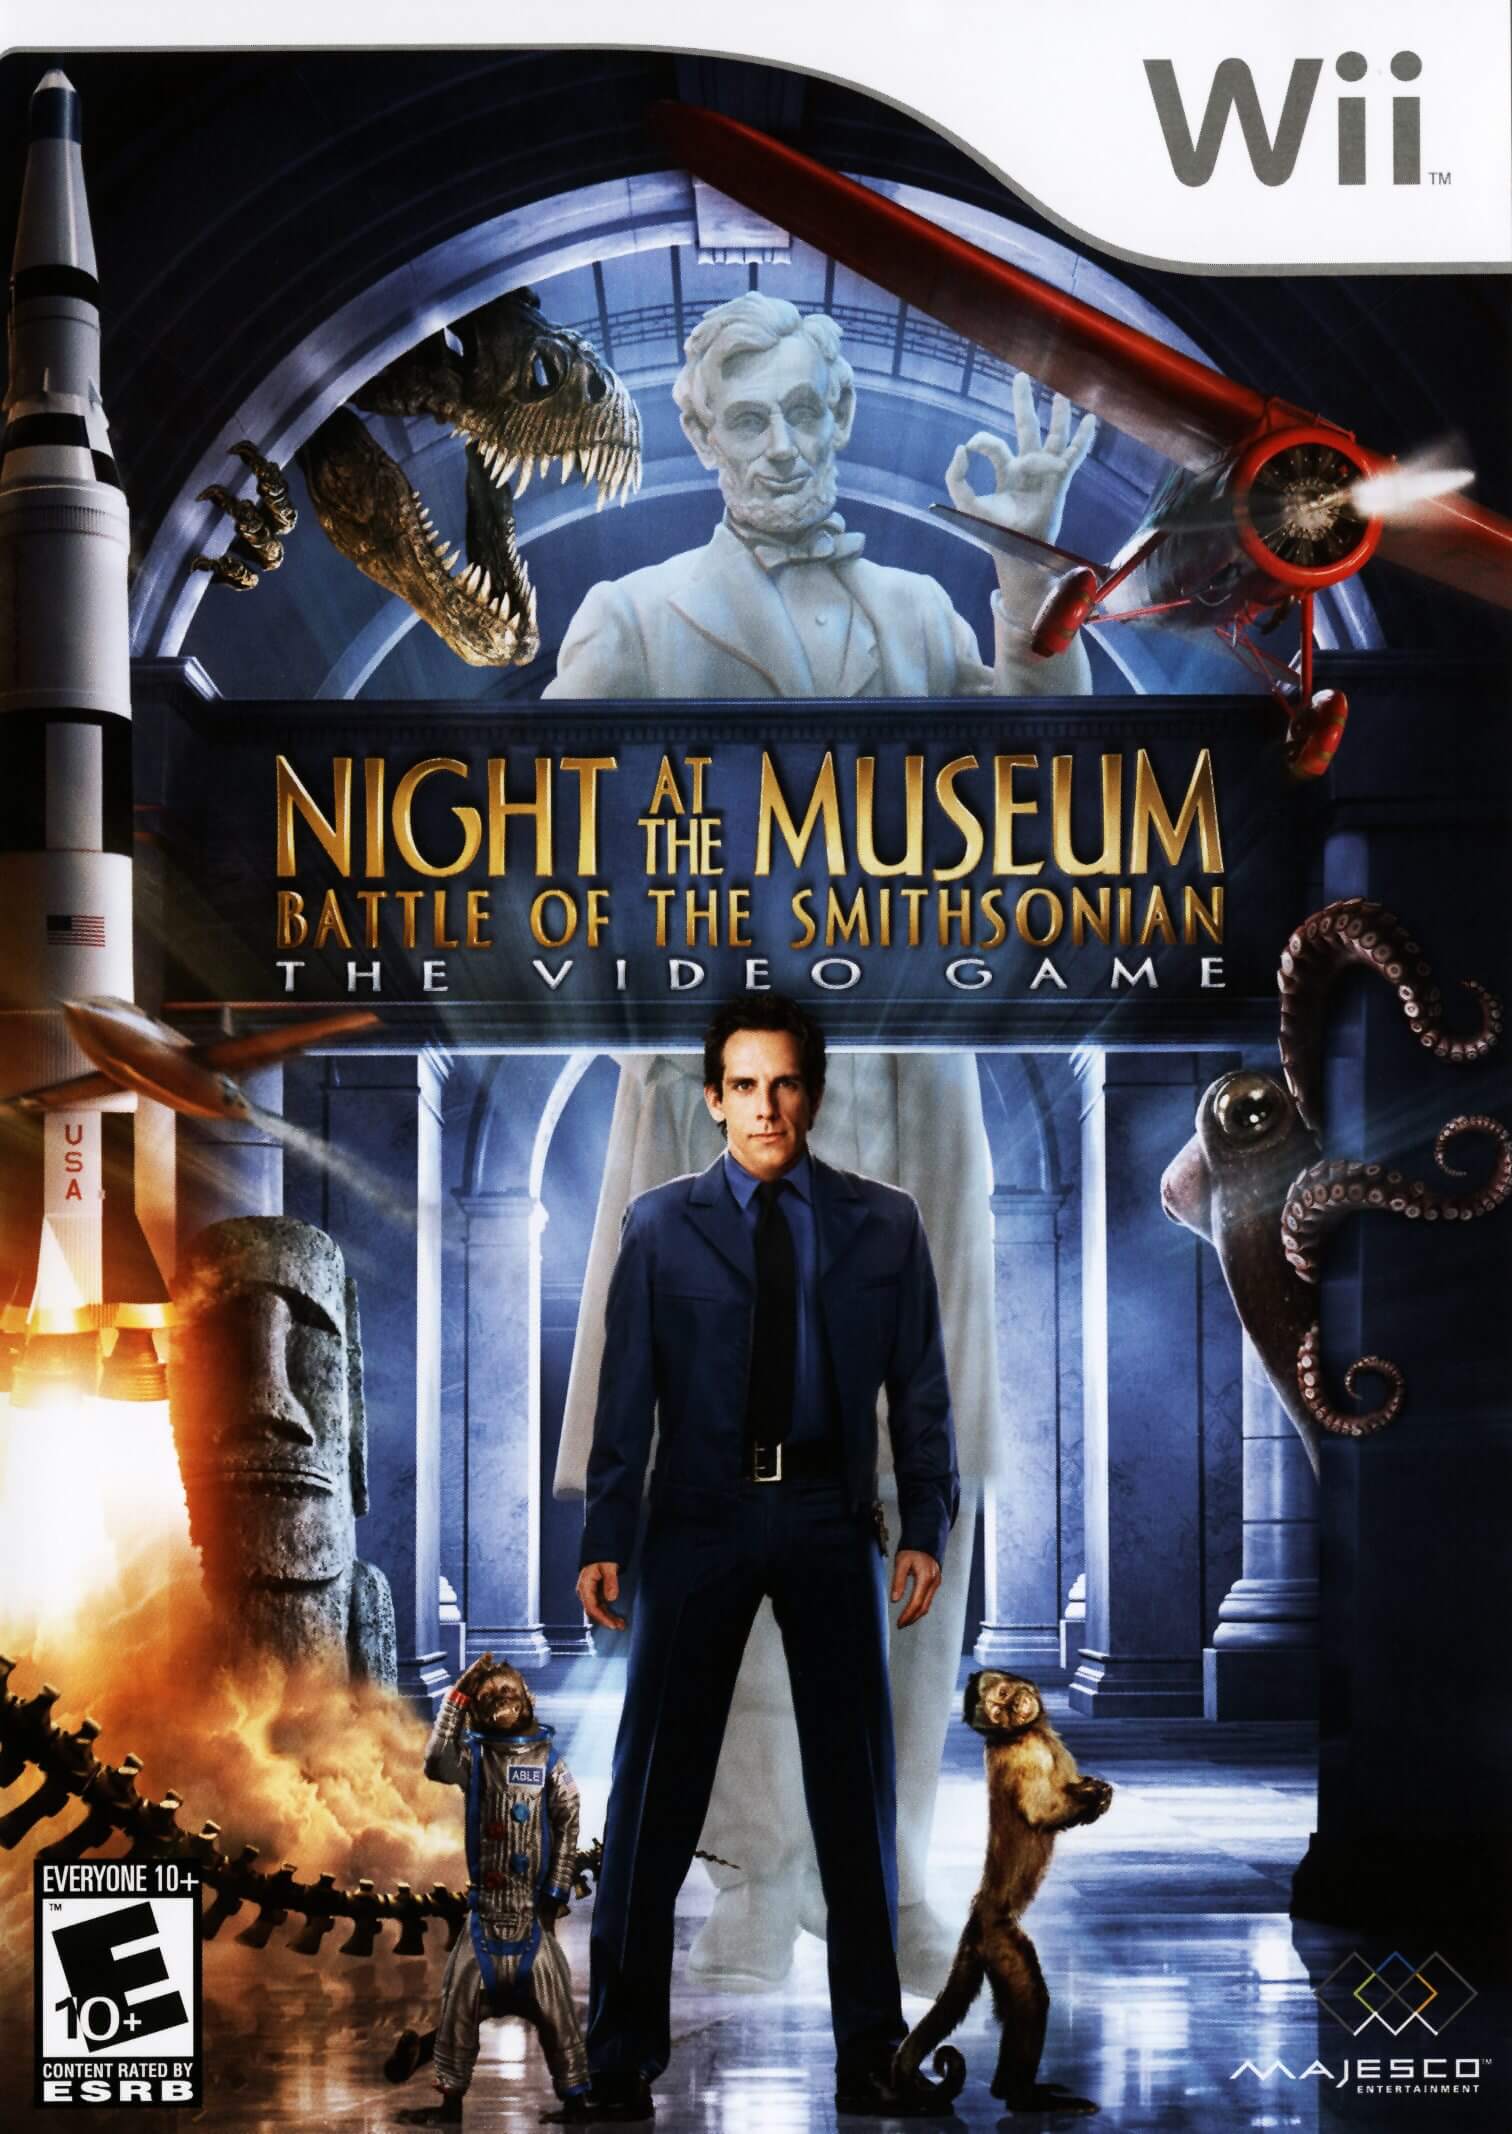 Night at the Museum: Battle of the Smithsonian: The Video Game